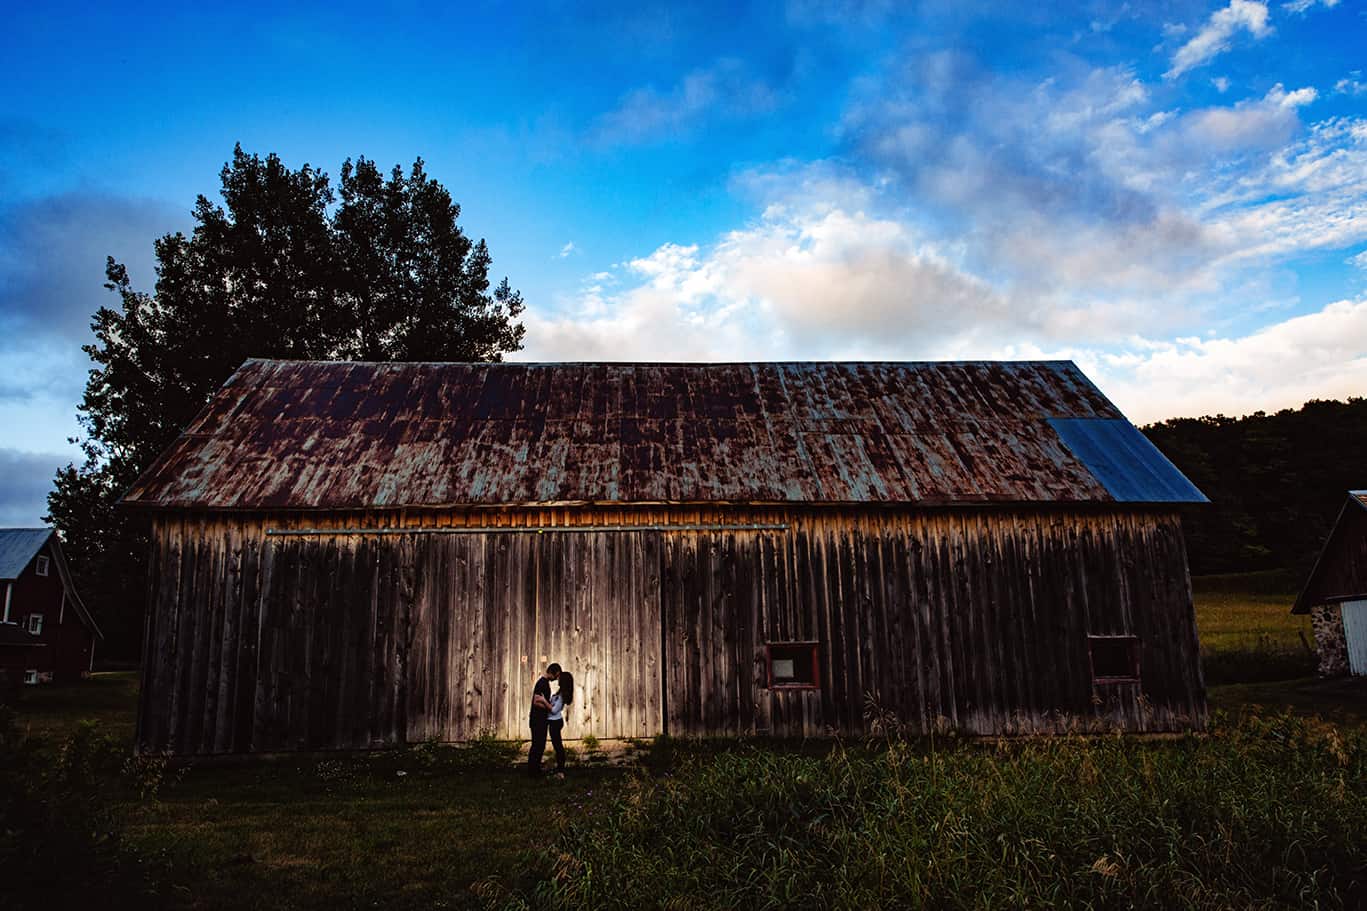 engagement photo in front of red barn with blue sky